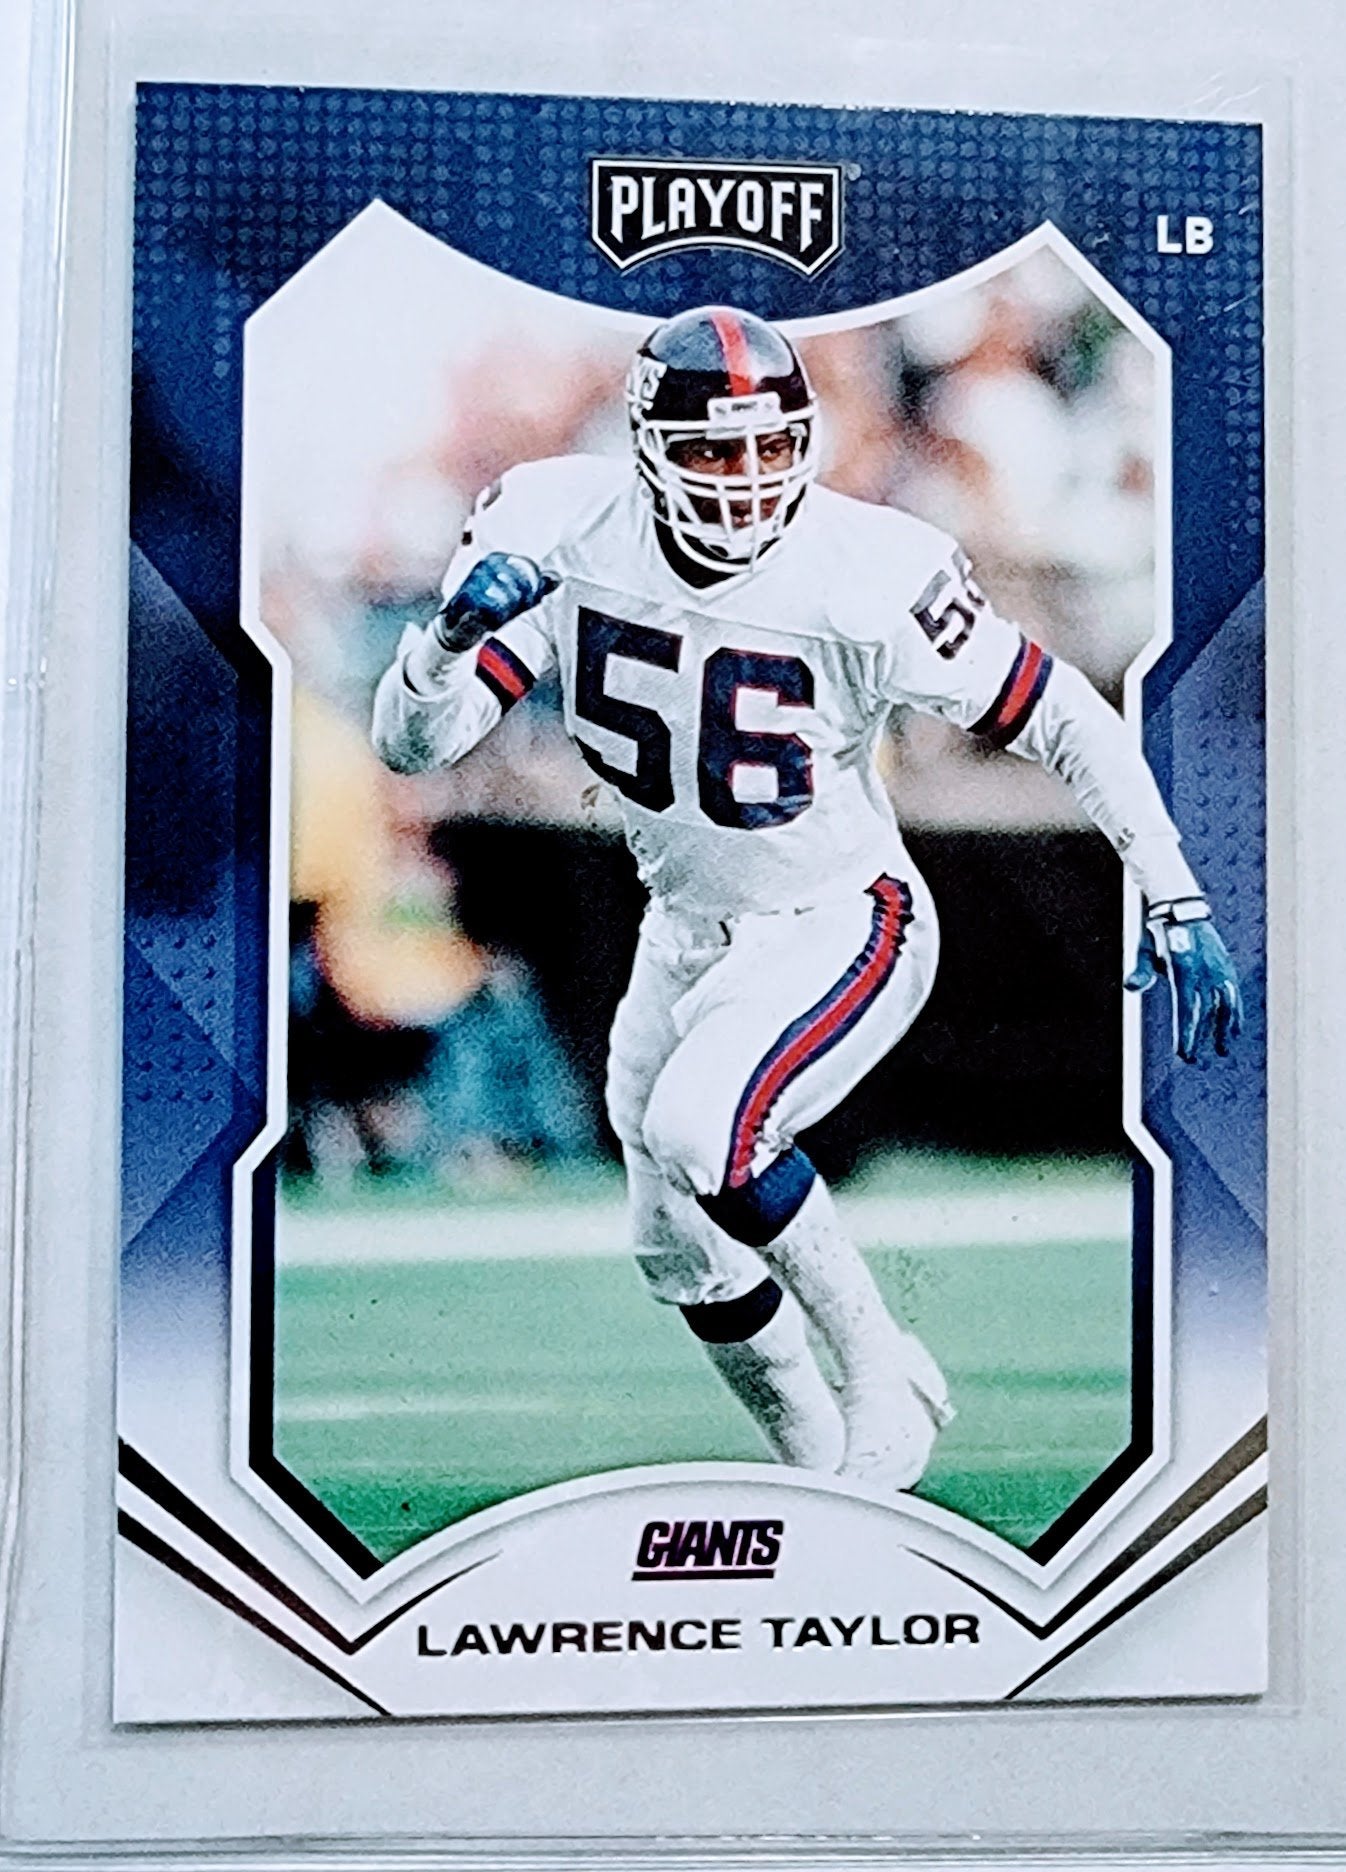 2021 Panini Playoff Lawrence Taylor Football Card AVM1 simple Xclusive Collectibles   